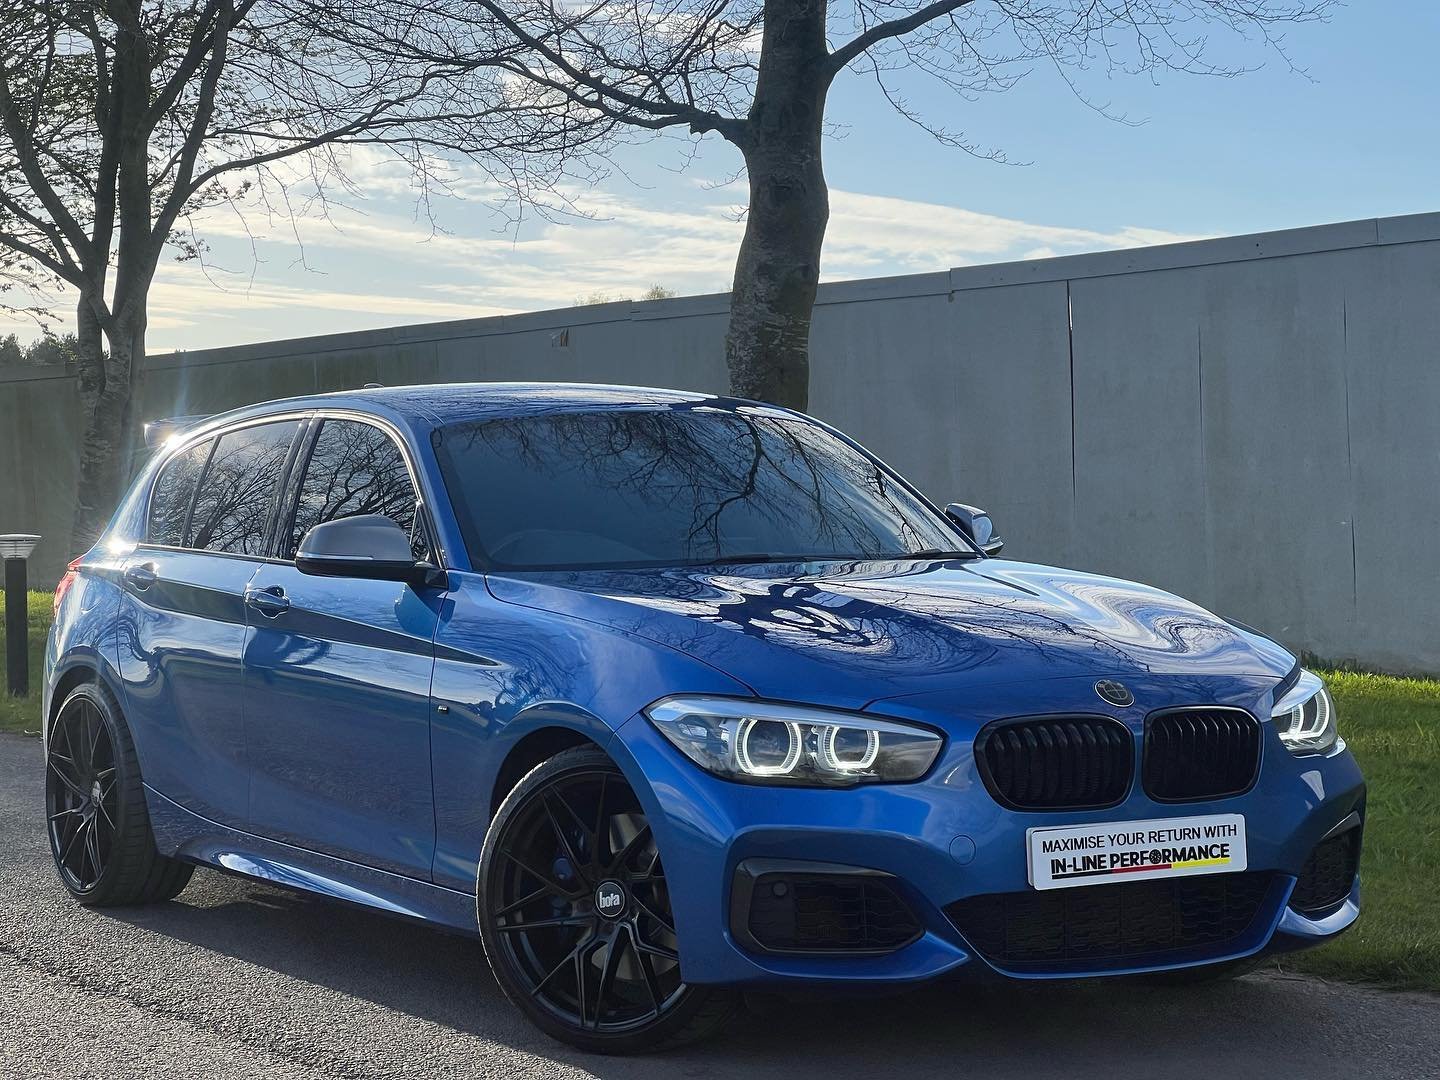 Here At IN-LINE PERFORMANCE We Take Pride And Joy Into Supplying You With Great Quality Of The Best Of Performance Engineering. We Are Proud To Present To You This 2017 BMW M140I Shadow Edition  Finished In A Desirable Estrol Blue With Black Dokota L